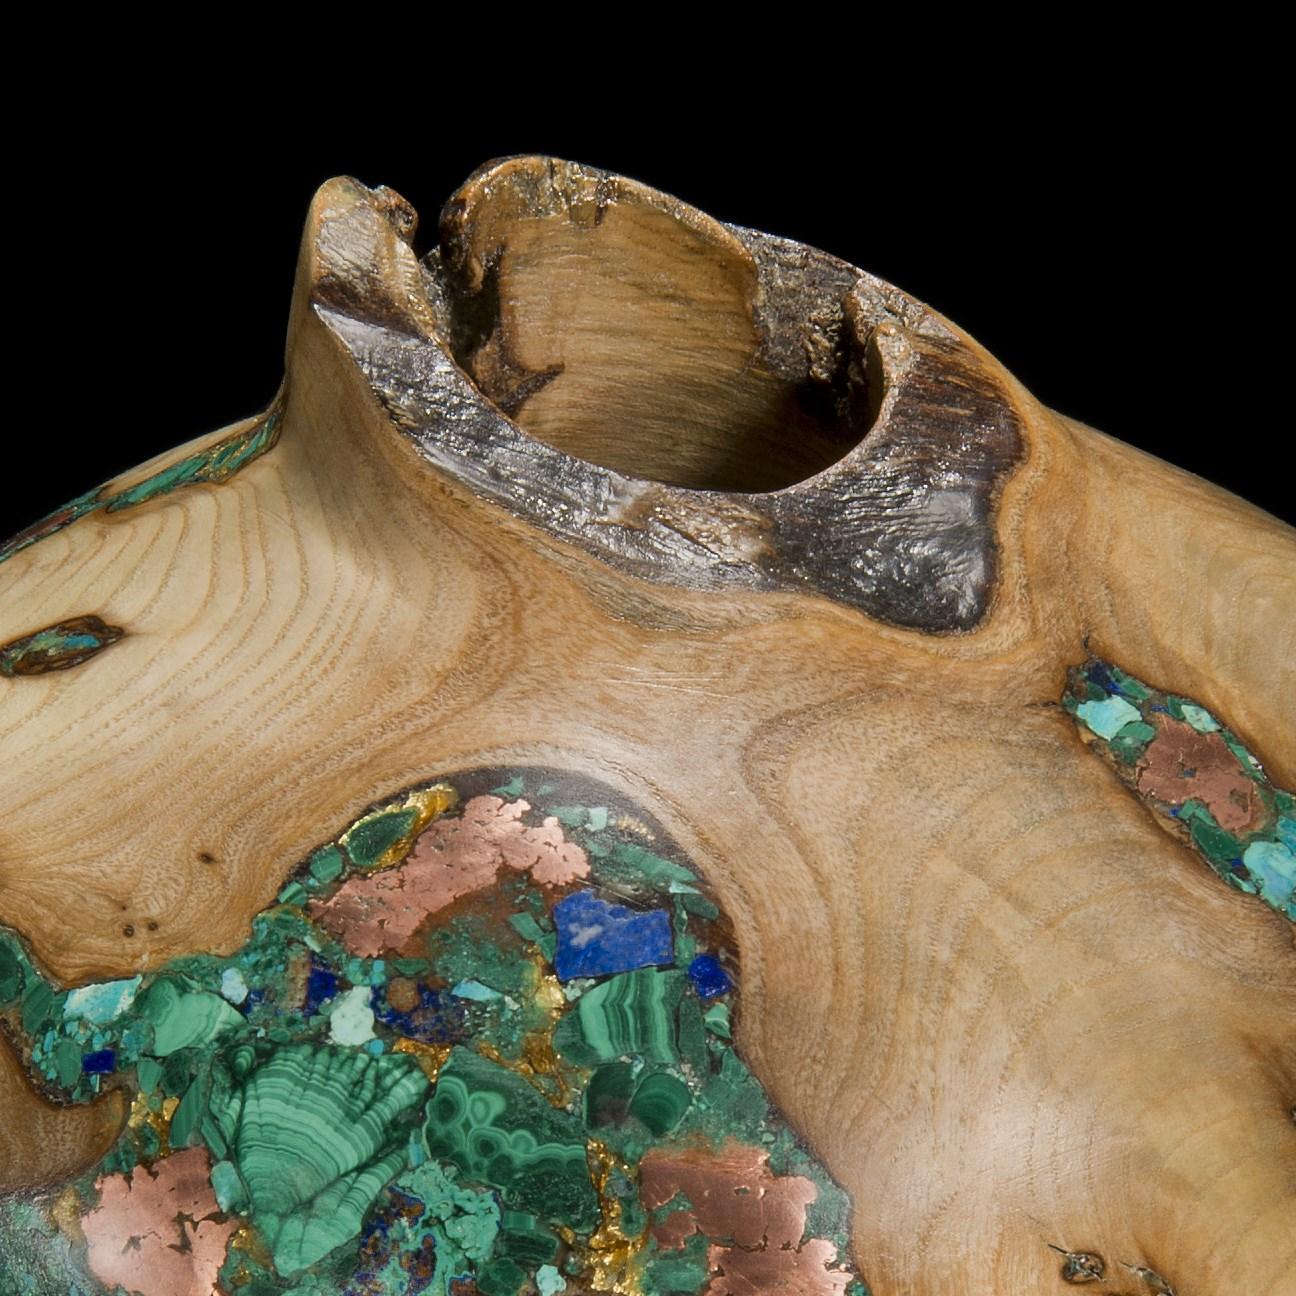 Hand-Crafted Earthly Treasures No 30, an Ash & Mixed Mineral Sculpture by Morrison Thomas